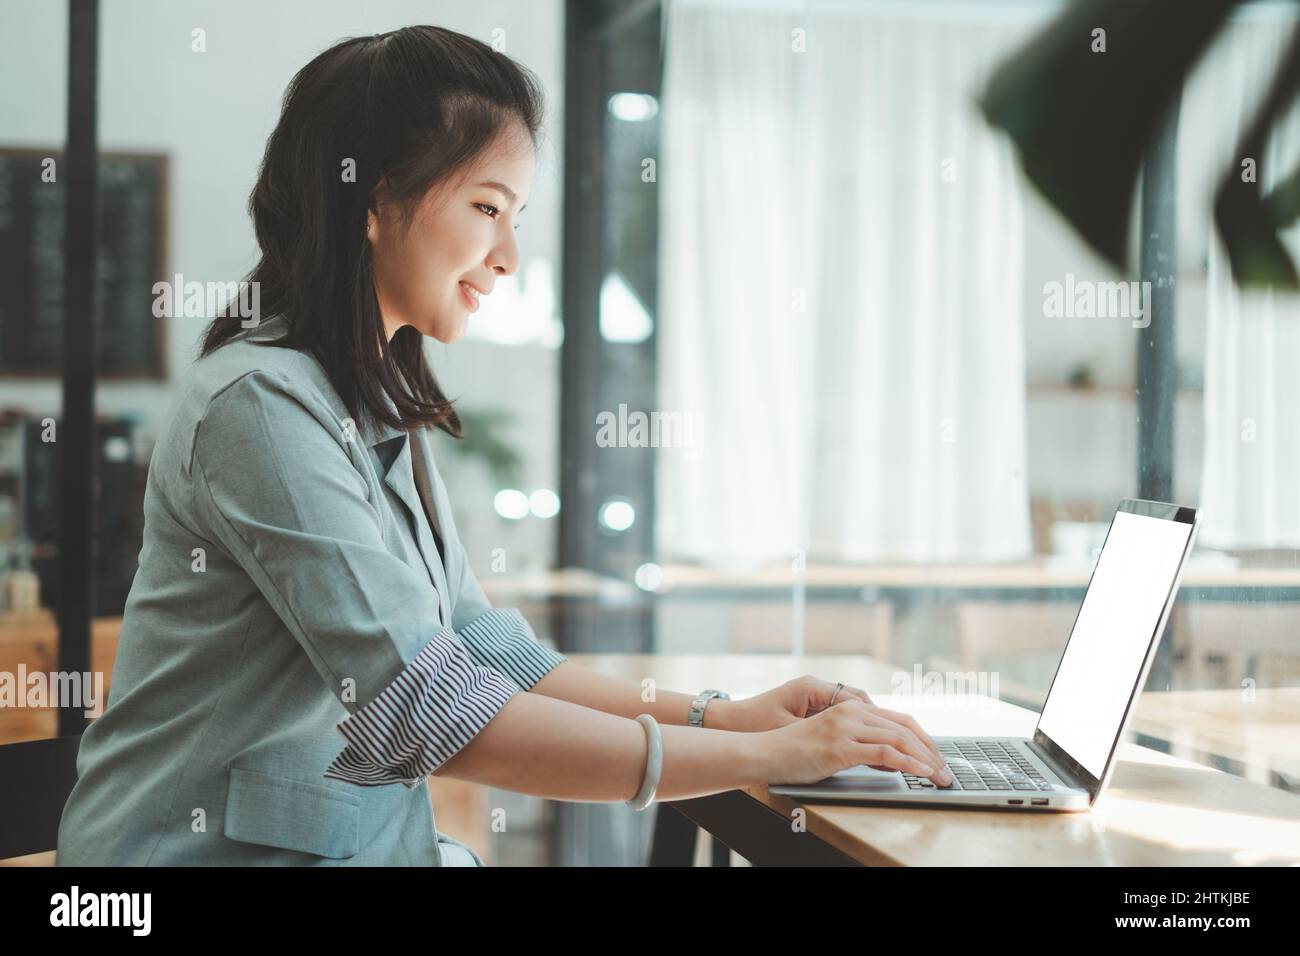 Asian Woman blogger wear blue suit talking with followers, live streaming on social media application. Freelance work from home concept. Stock Photo